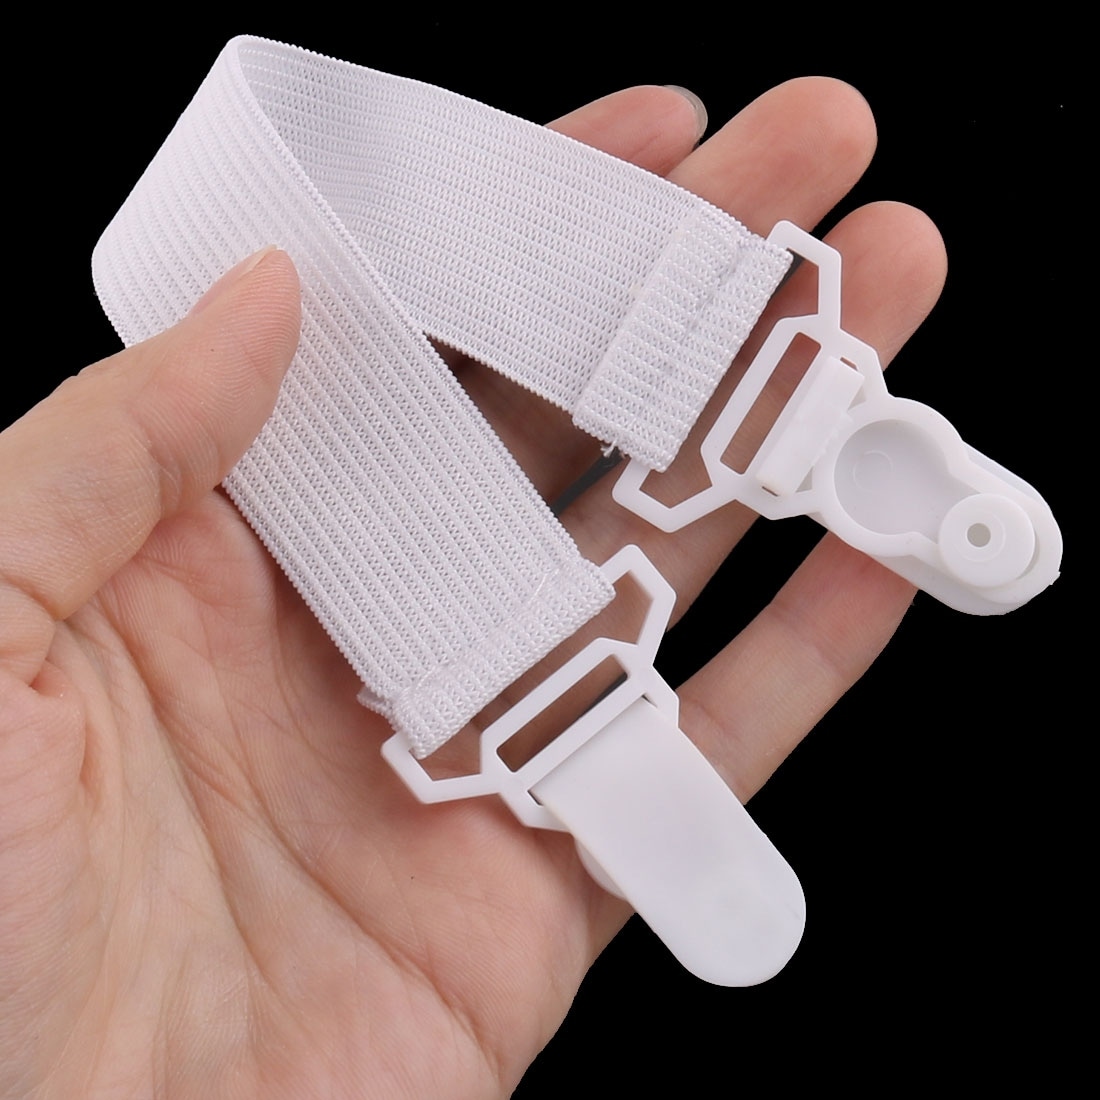 Bed Sheet Grippers Fasteners Bed Sheet Clips Keep Sheets Snug(12